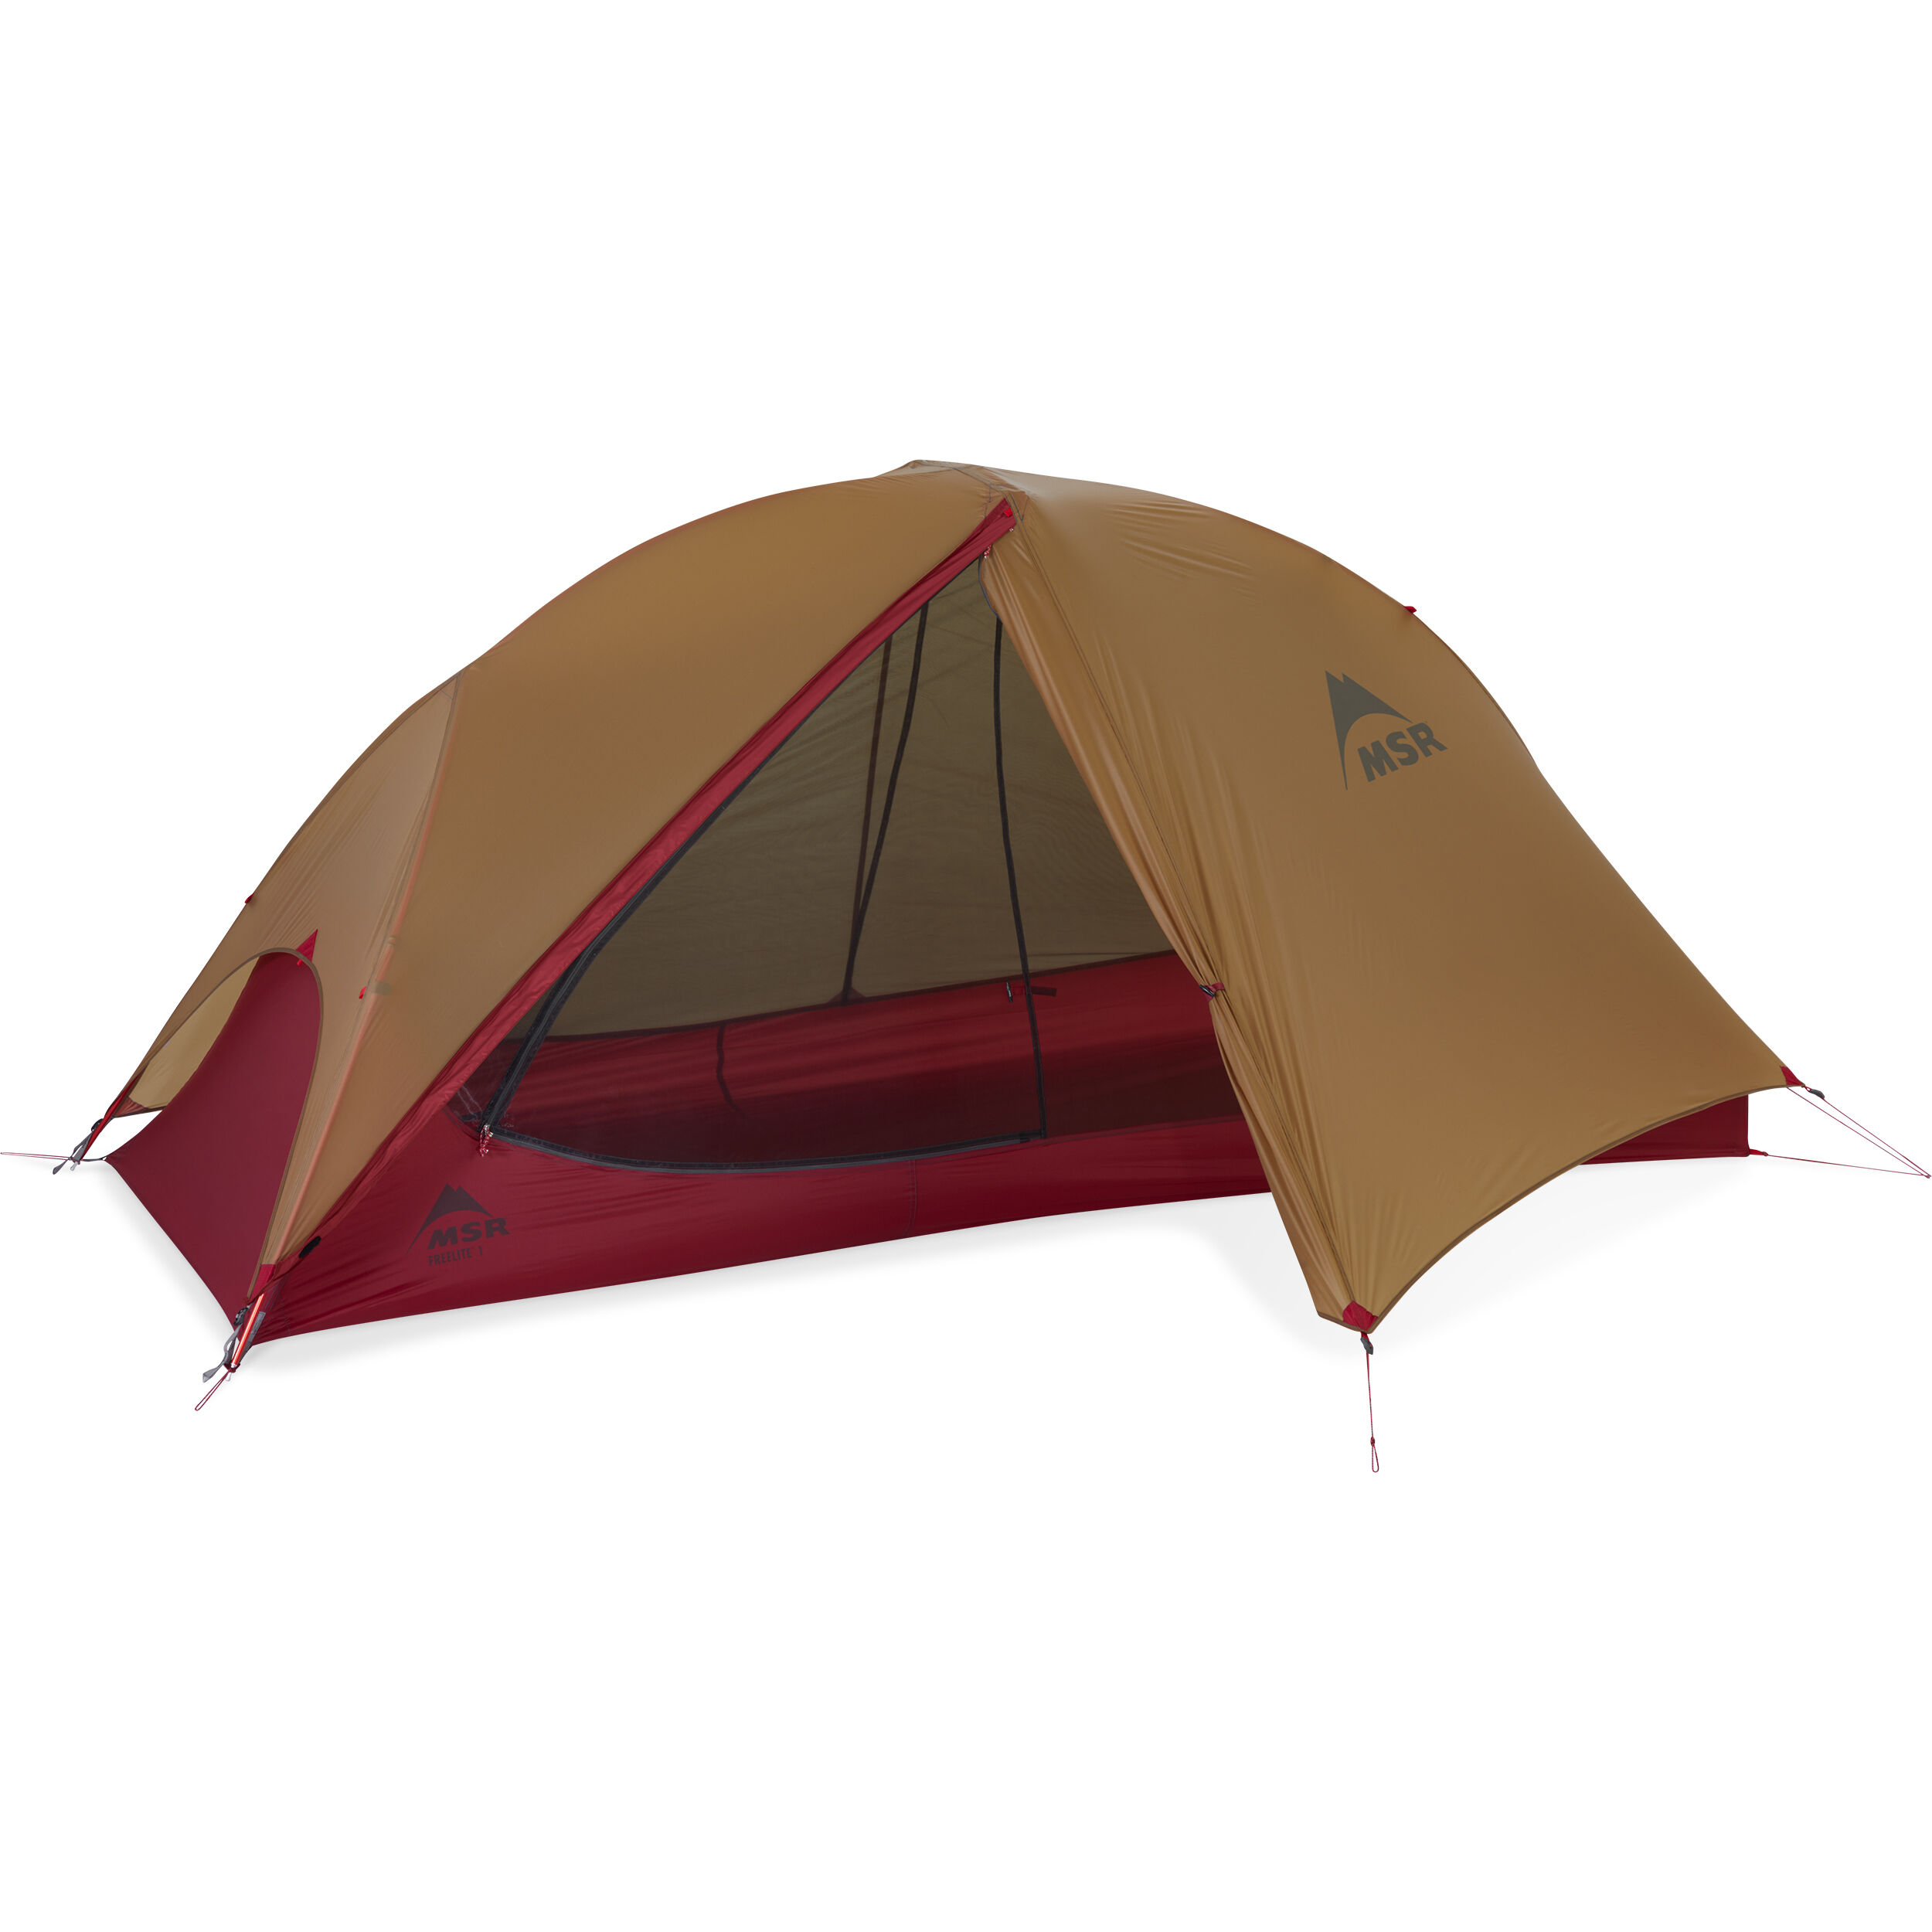 MSR® Tents | Backpacking & Camping Tents, Poles, Stakes